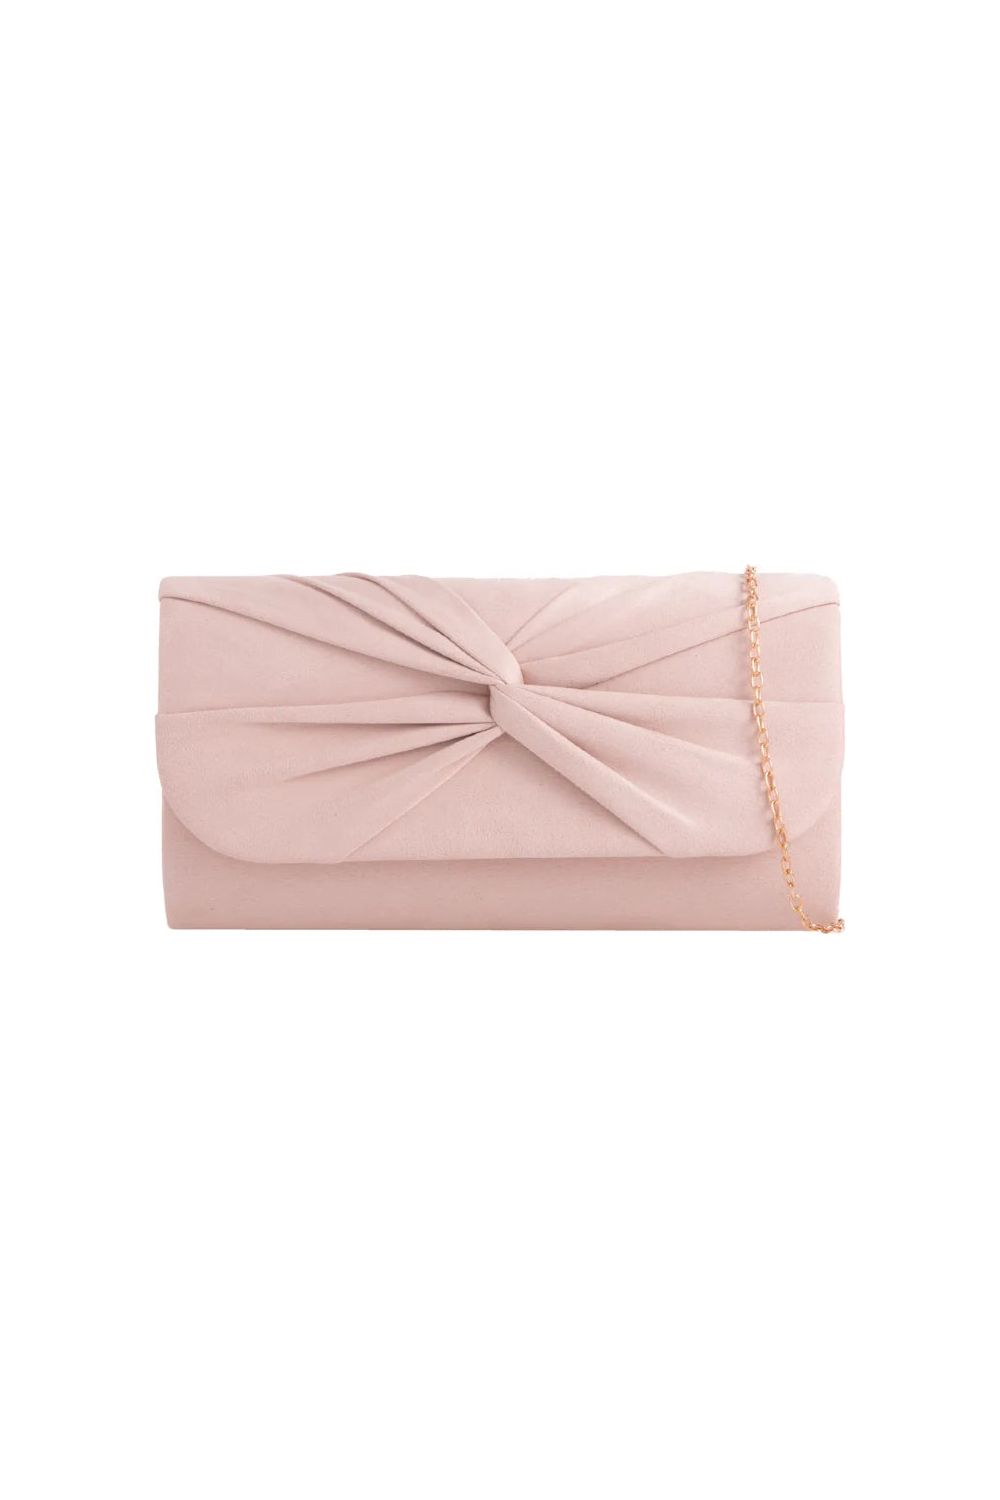 Nude Suede Clutch Bag With Knot Detail ALJ2724